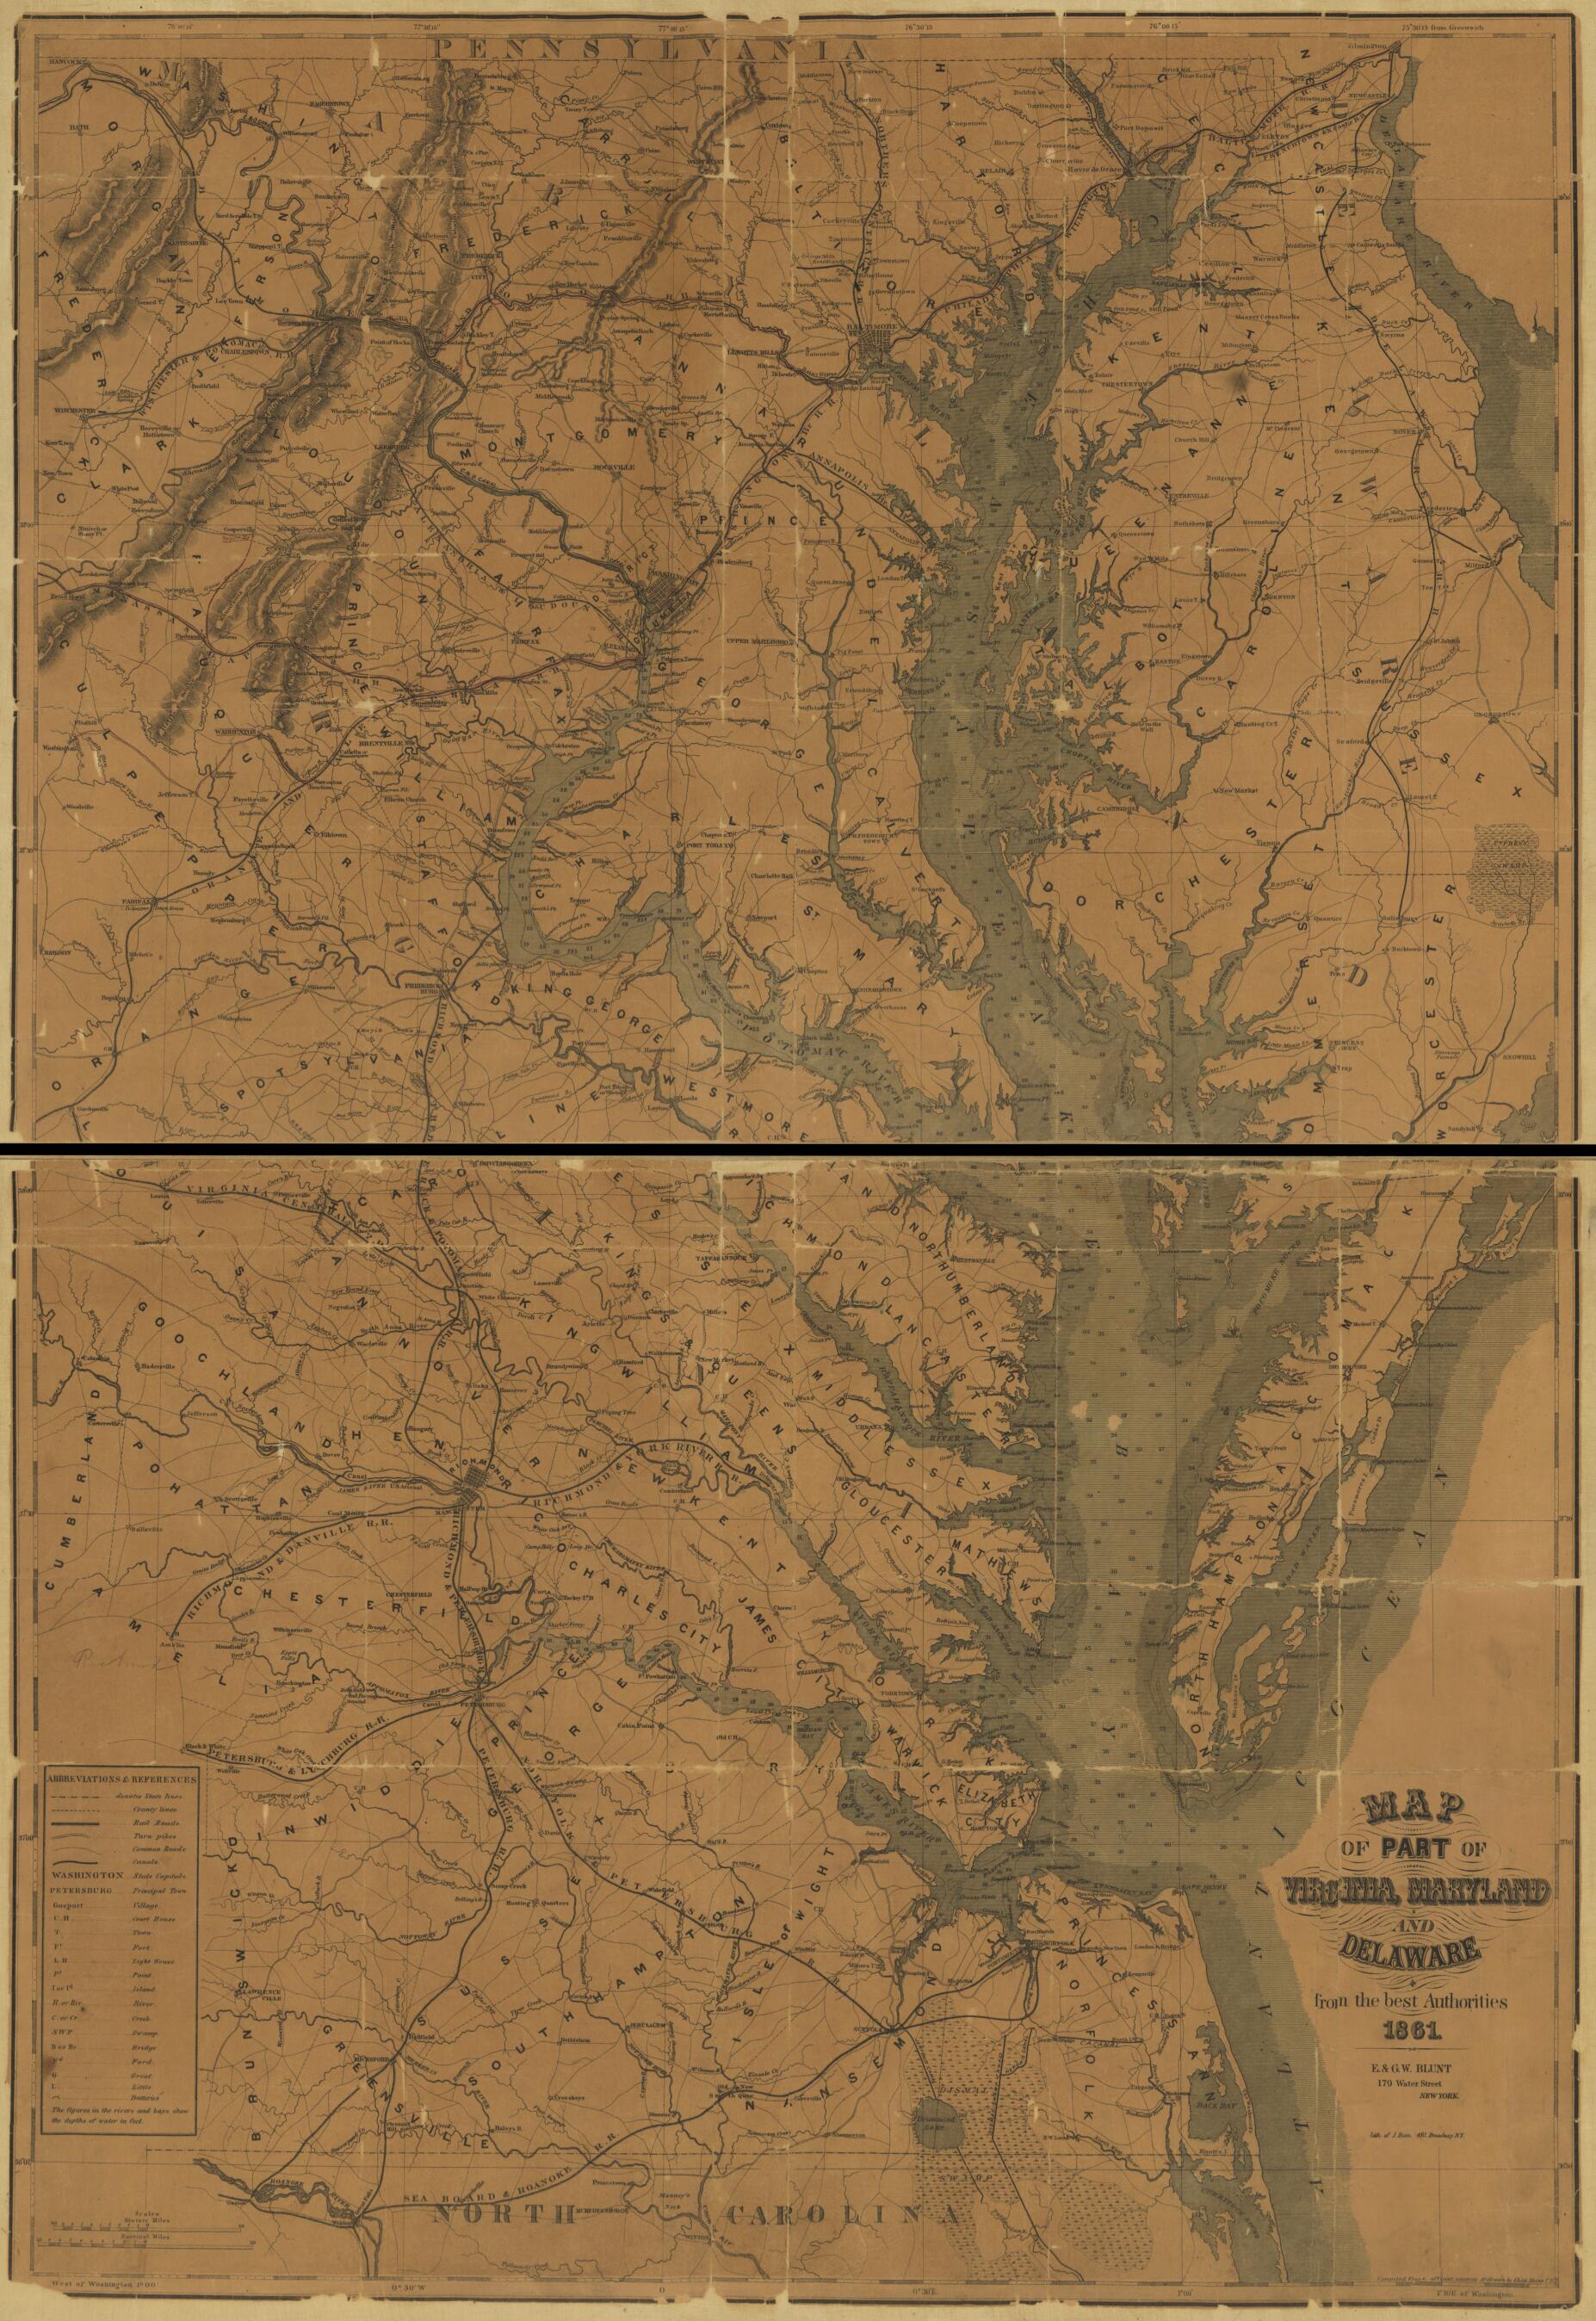 This old map of Map of Part of Virginia, Maryland and Delaware from the Best Authorities from 1861 was created by Charles Heyne in 1861